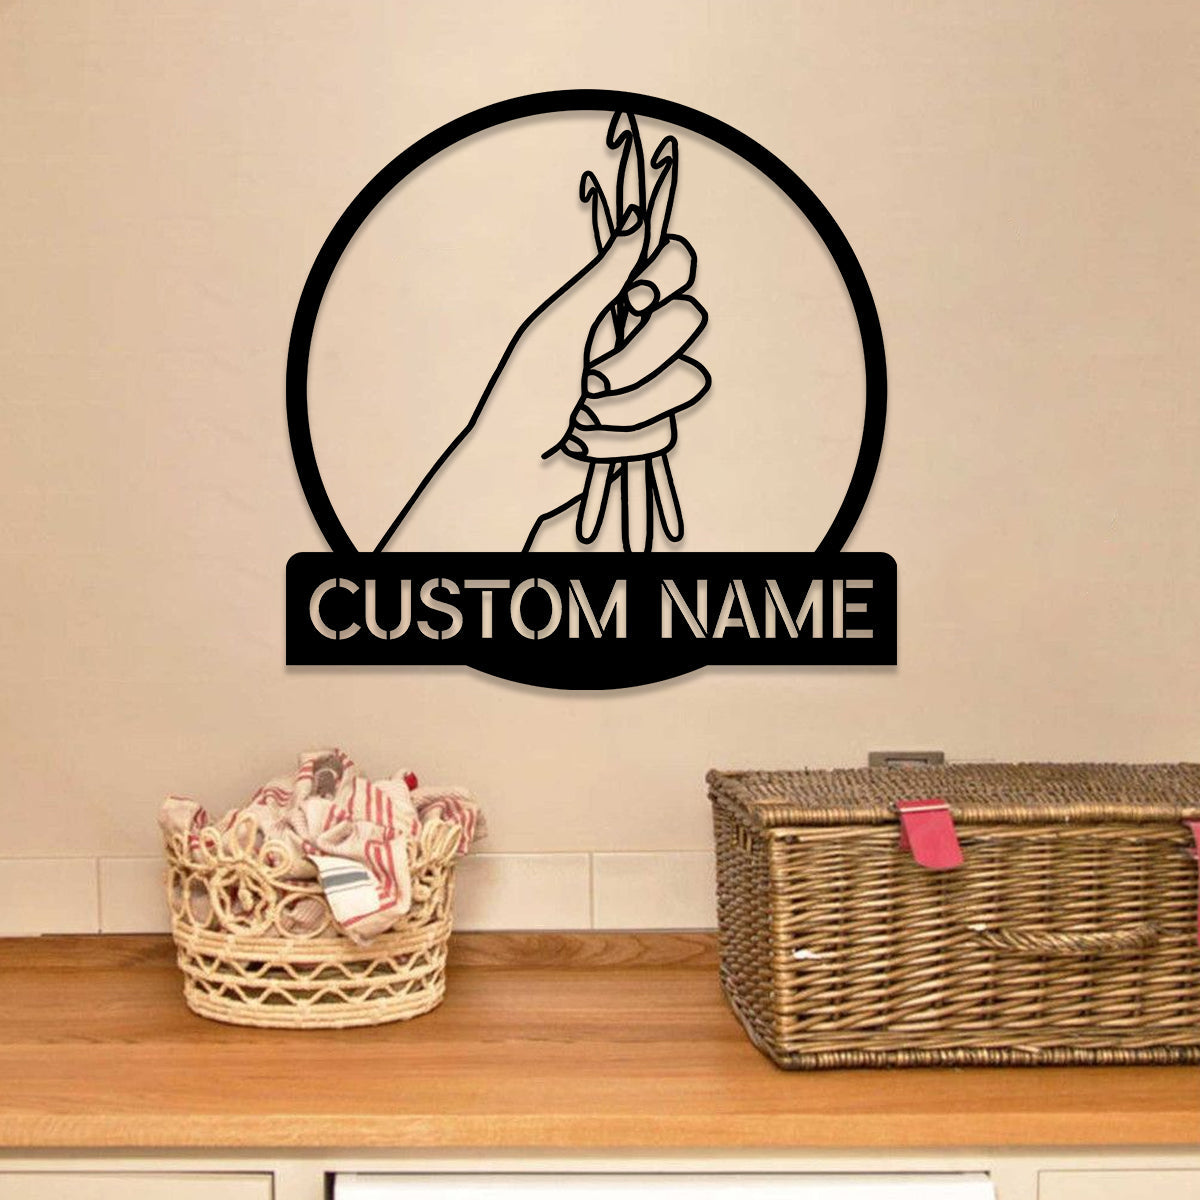 Personalized Crochet Knitting Metal Sign, Wedding, Anniversary Gift For Her, Mother, Grandma